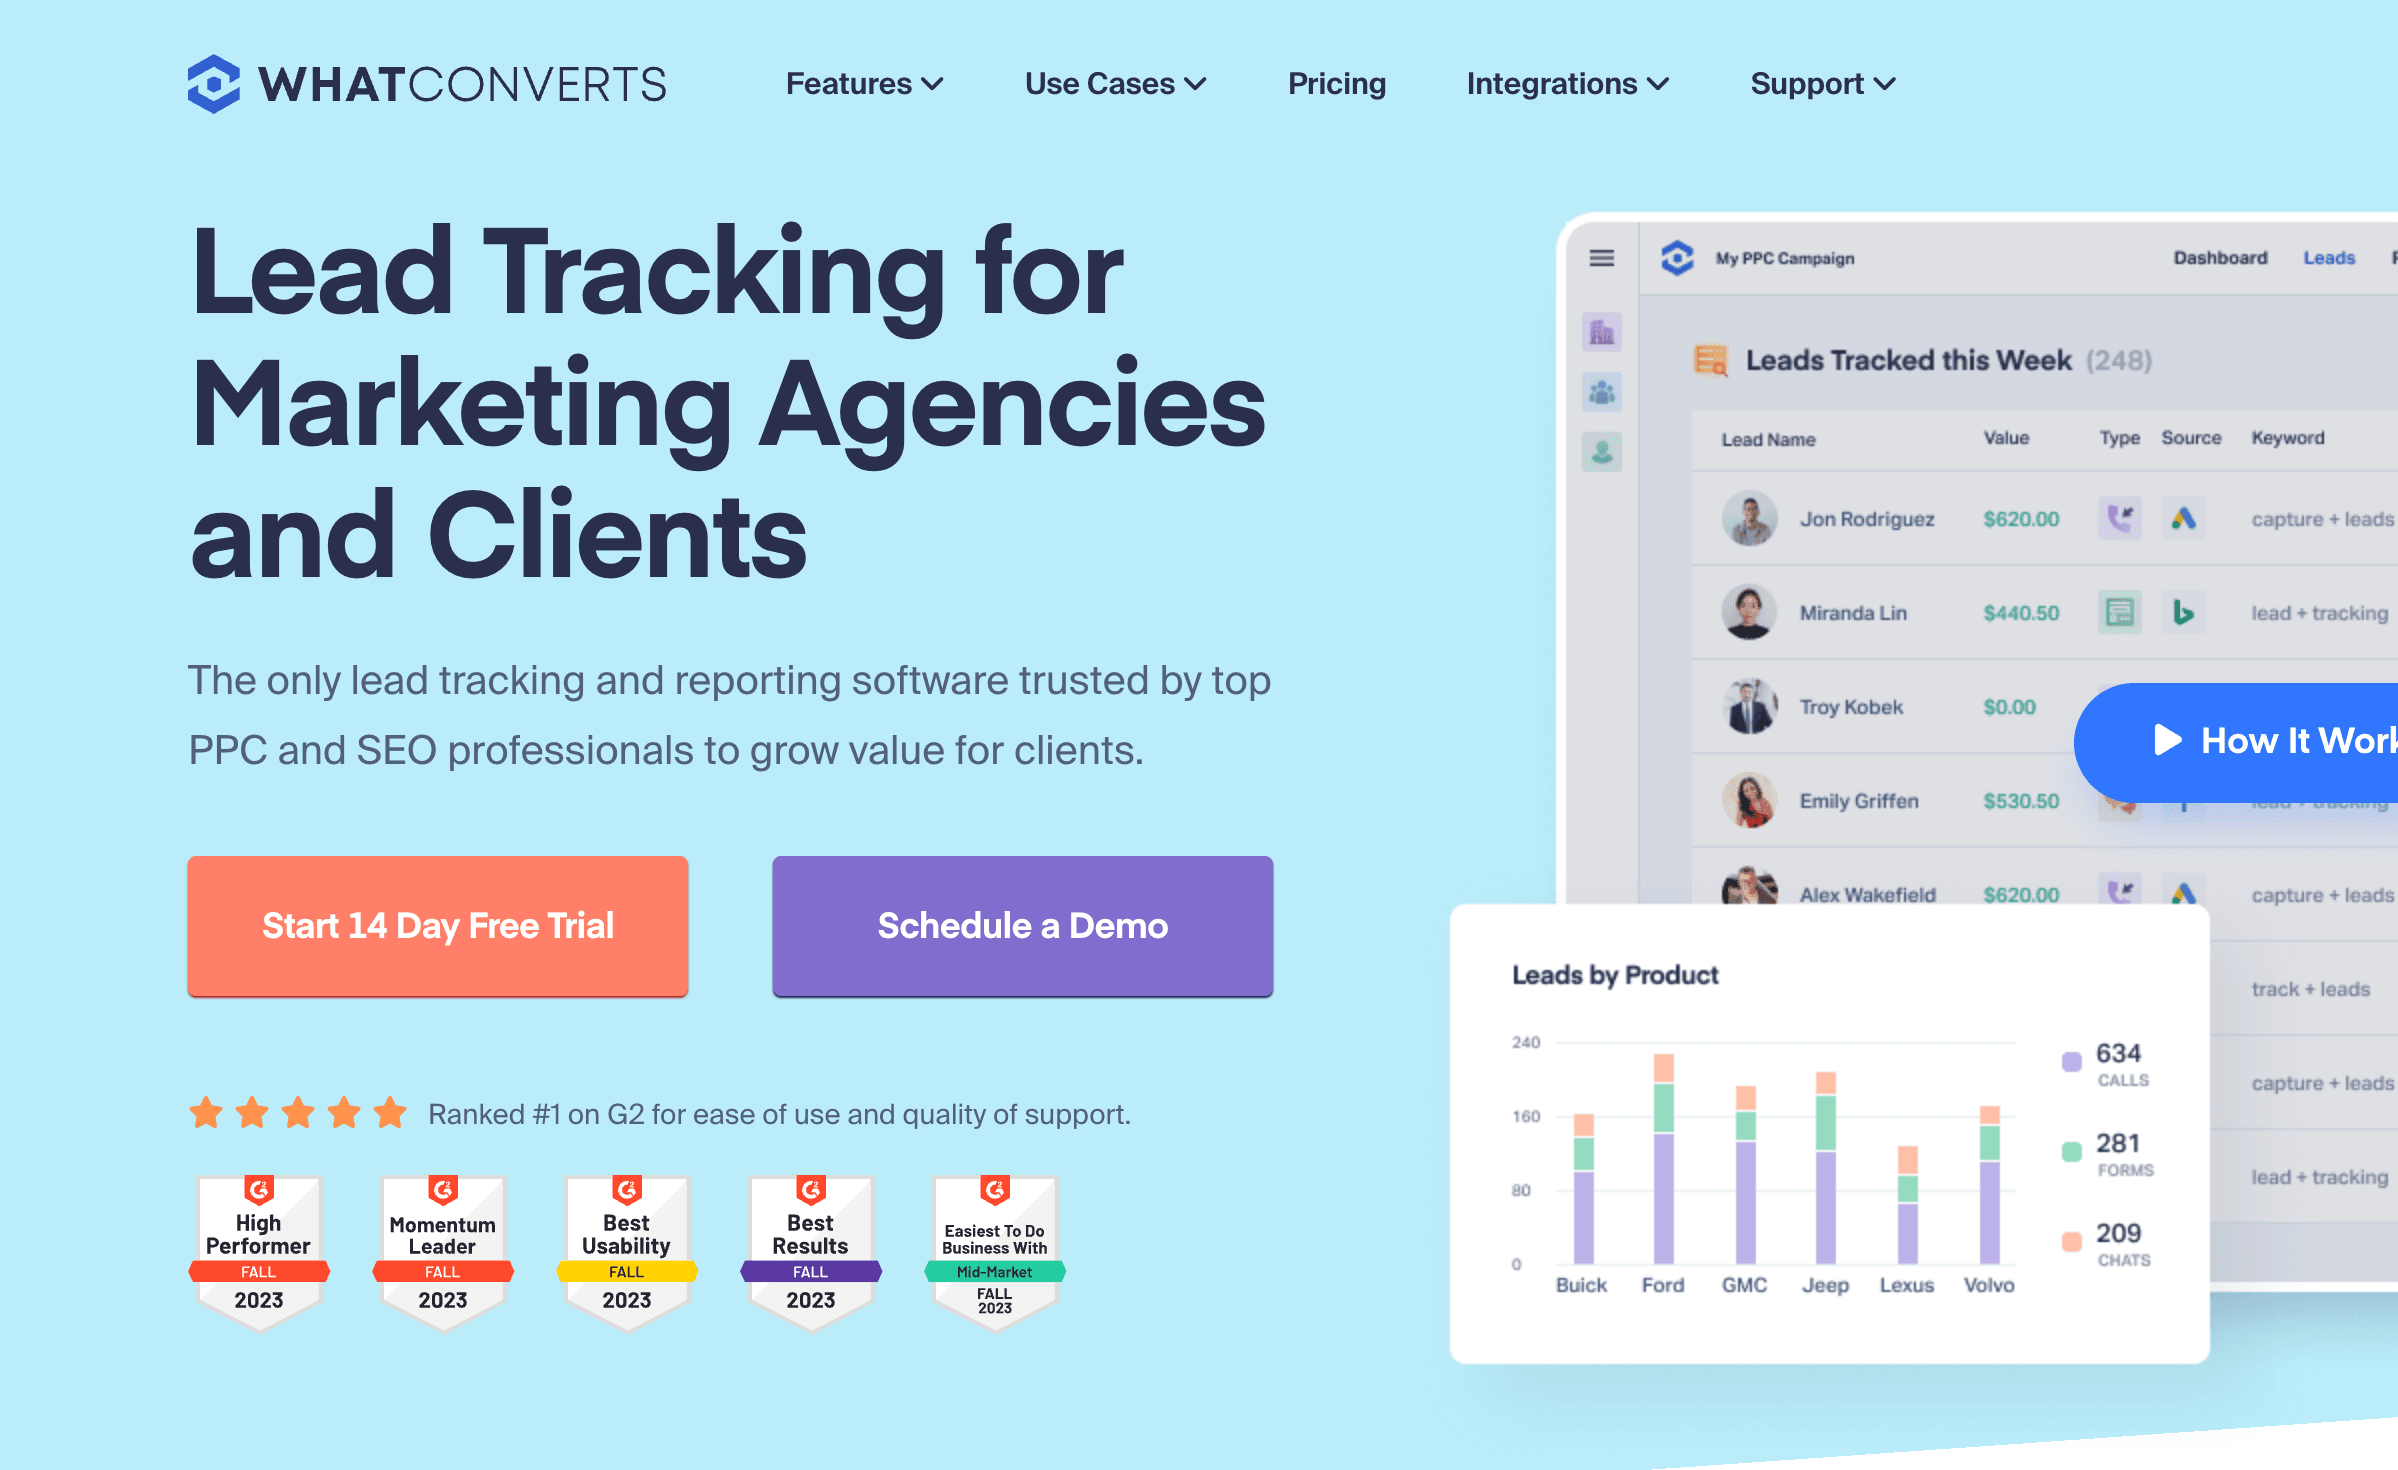 Whatconverts lead tracking and reporting